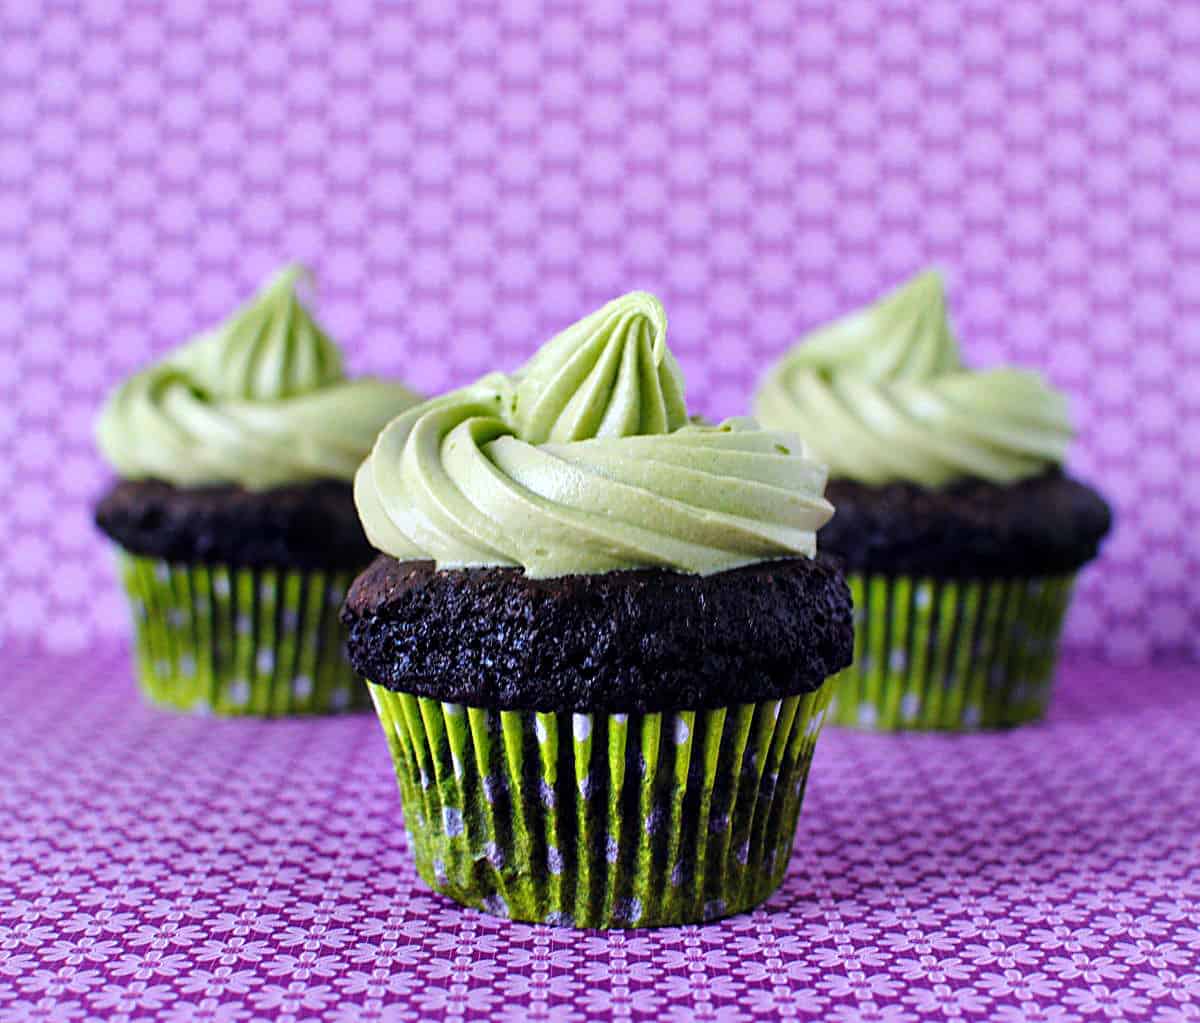 Matcha powder is added to a fluffy cream cheese frosting and swirled over the top of moist chocolate cupcakes. Get the recipe from PassTheSushi.com